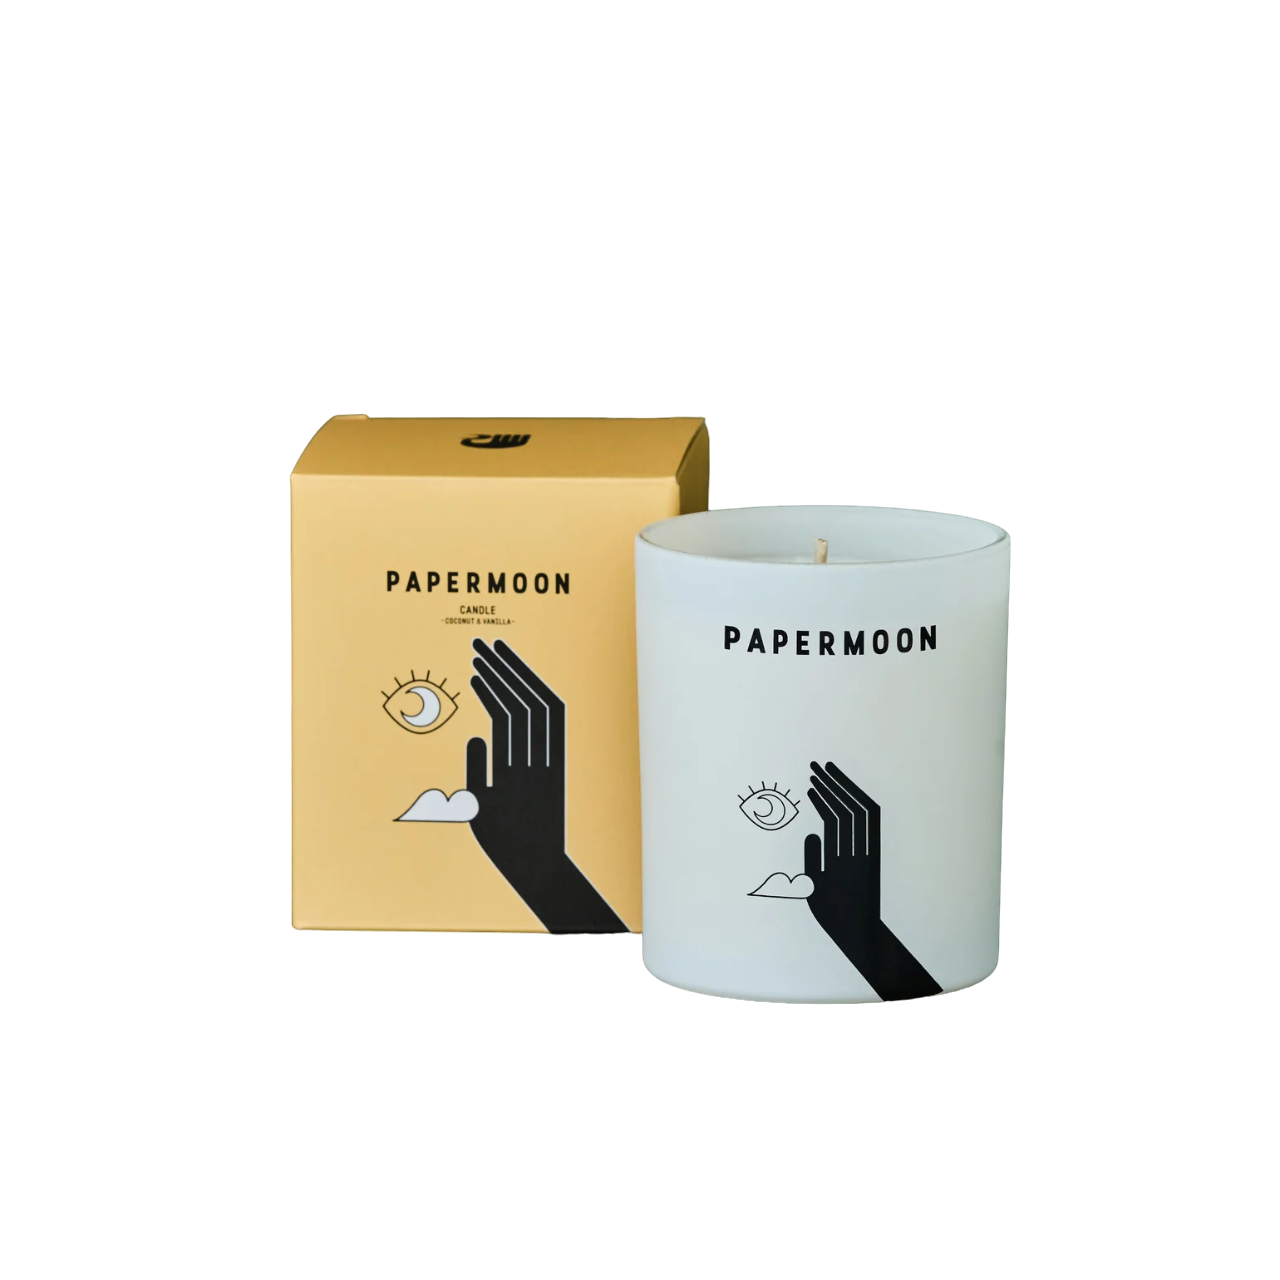 Papermoon Coconut & Vanilla Candle 300g